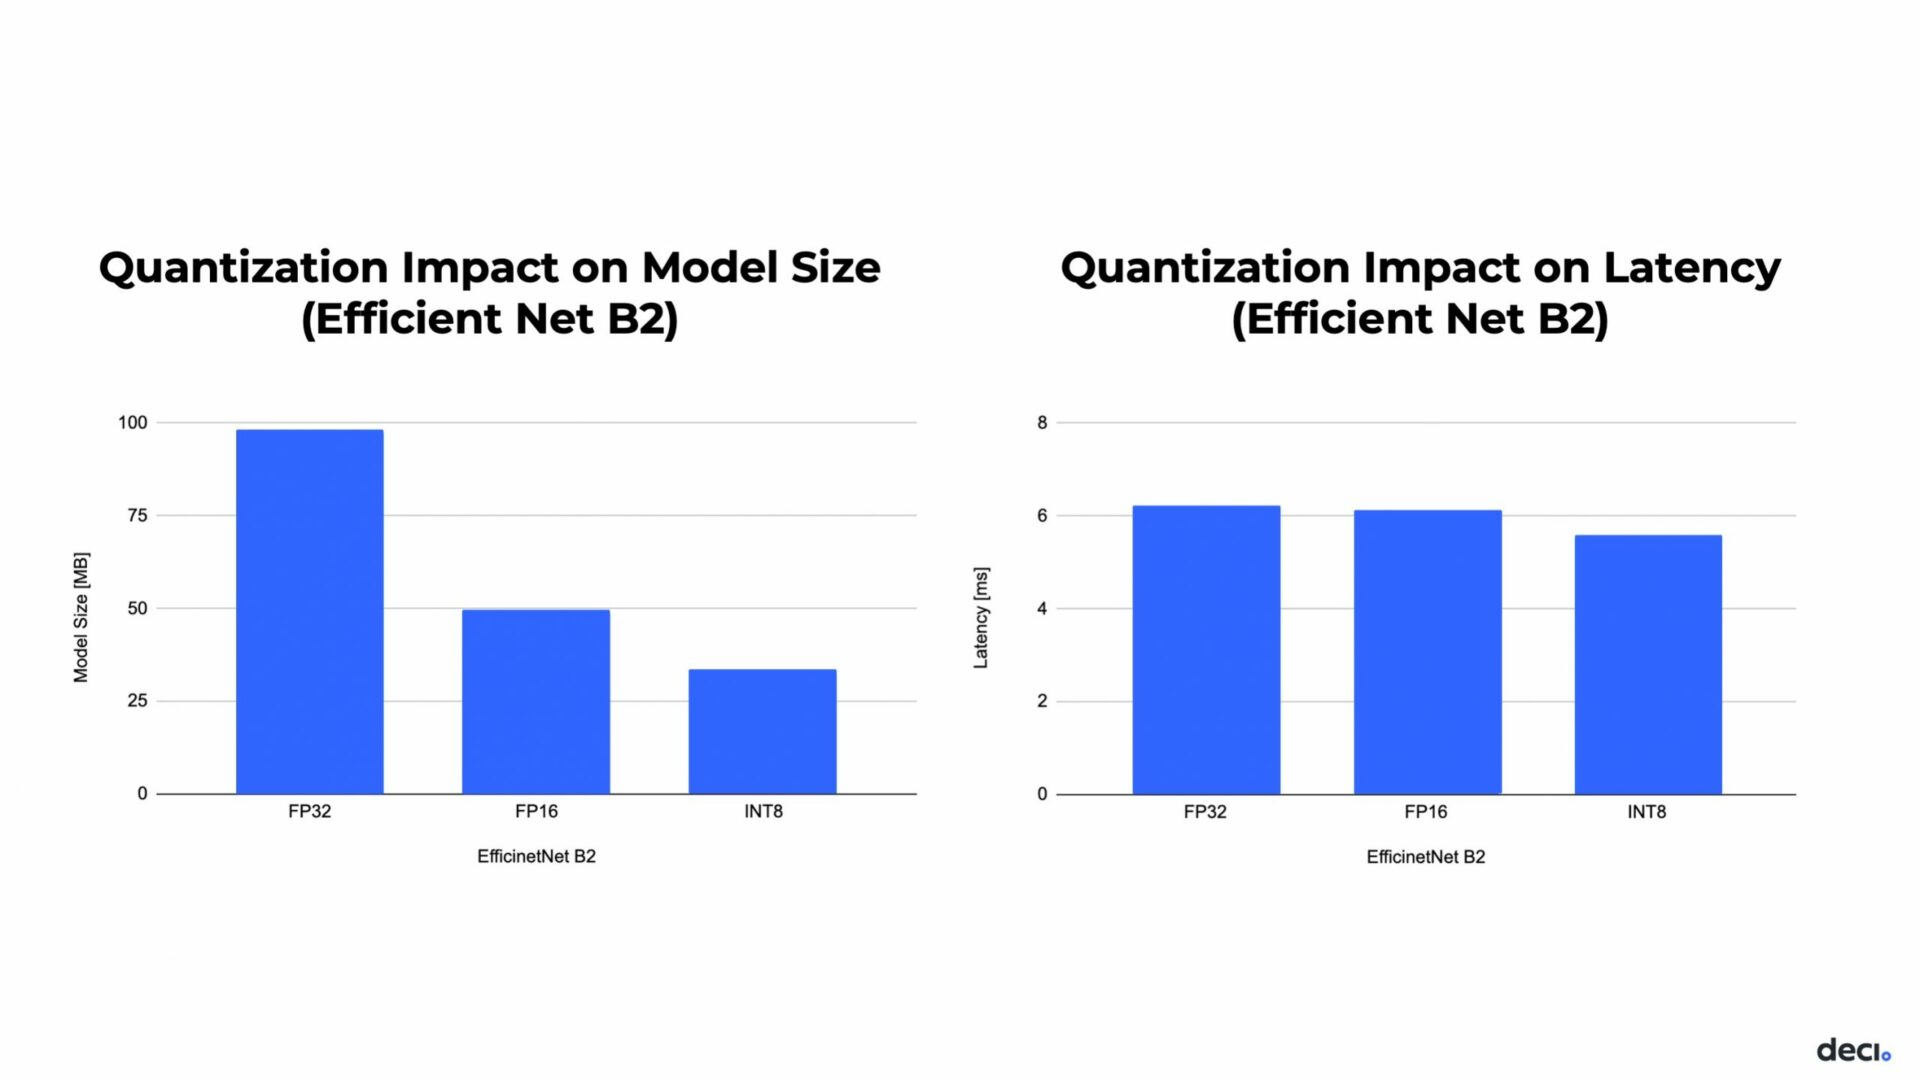 Two graphs showing quantization impact on model